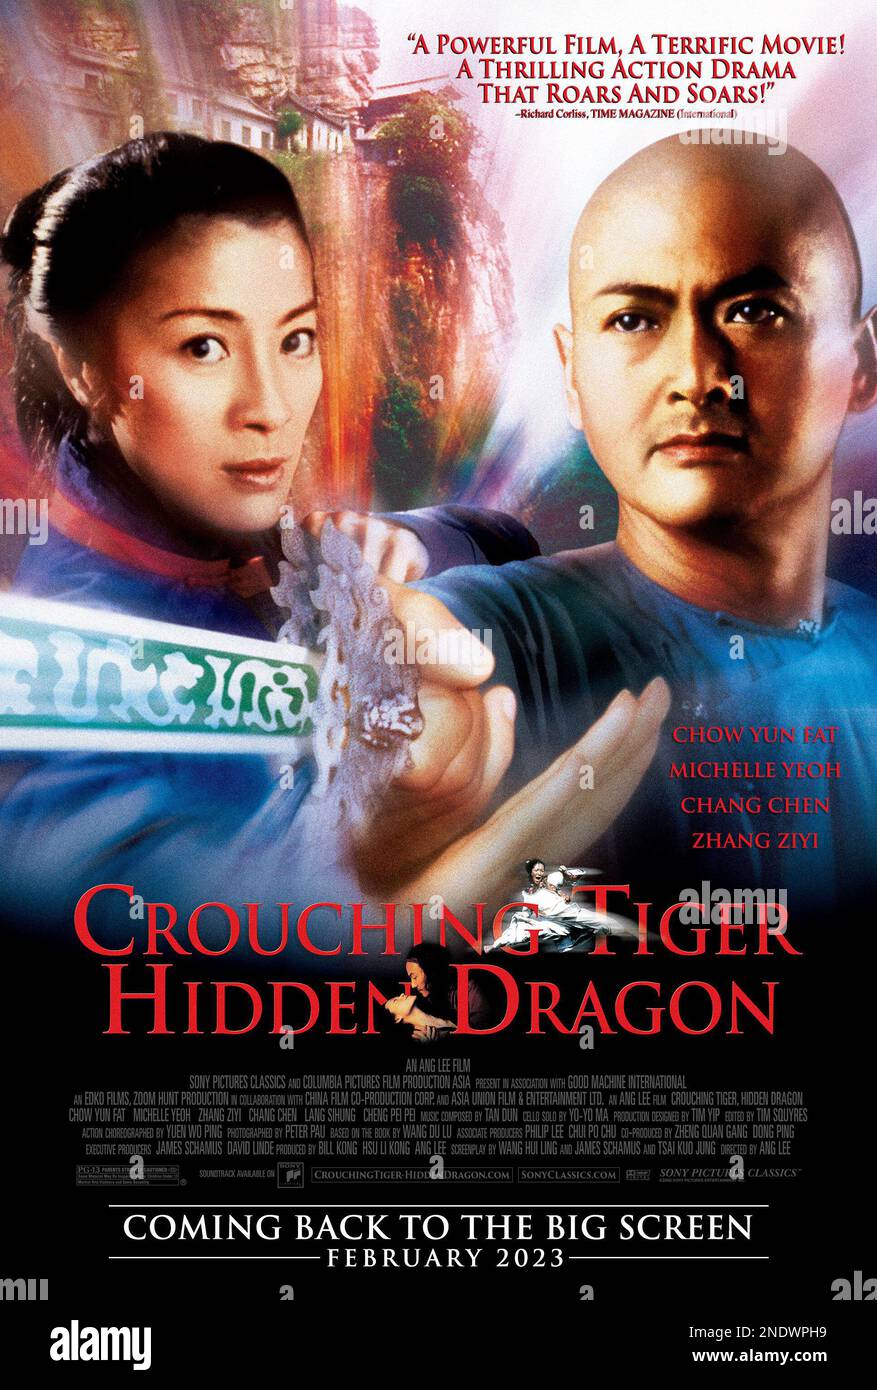 THEATRICAL RE-RELEASE DATE: 2023 back in theaters. ORIGINAL RELEASE: January 12, 2021. TITLE: Crouching Tiger, Hidden Dragon. STUDIO: Columbia Films. DIRECTOR: Ang Lee. PLOT: A young Chinese warrior steals a sword from a famed swordsman and then escapes into a world of romantic adventure with a mysterious man in the frontier of the nation. STARRING: Chow Yun-Fat, Michelle Yeoh, Ziyi Zhang. (Credit Image: © Columbia Films/Entertainment Pictures/ZUMAPRESS.com) EDITORIAL USAGE ONLY! Not for Commercial USAGE! Stock Photo